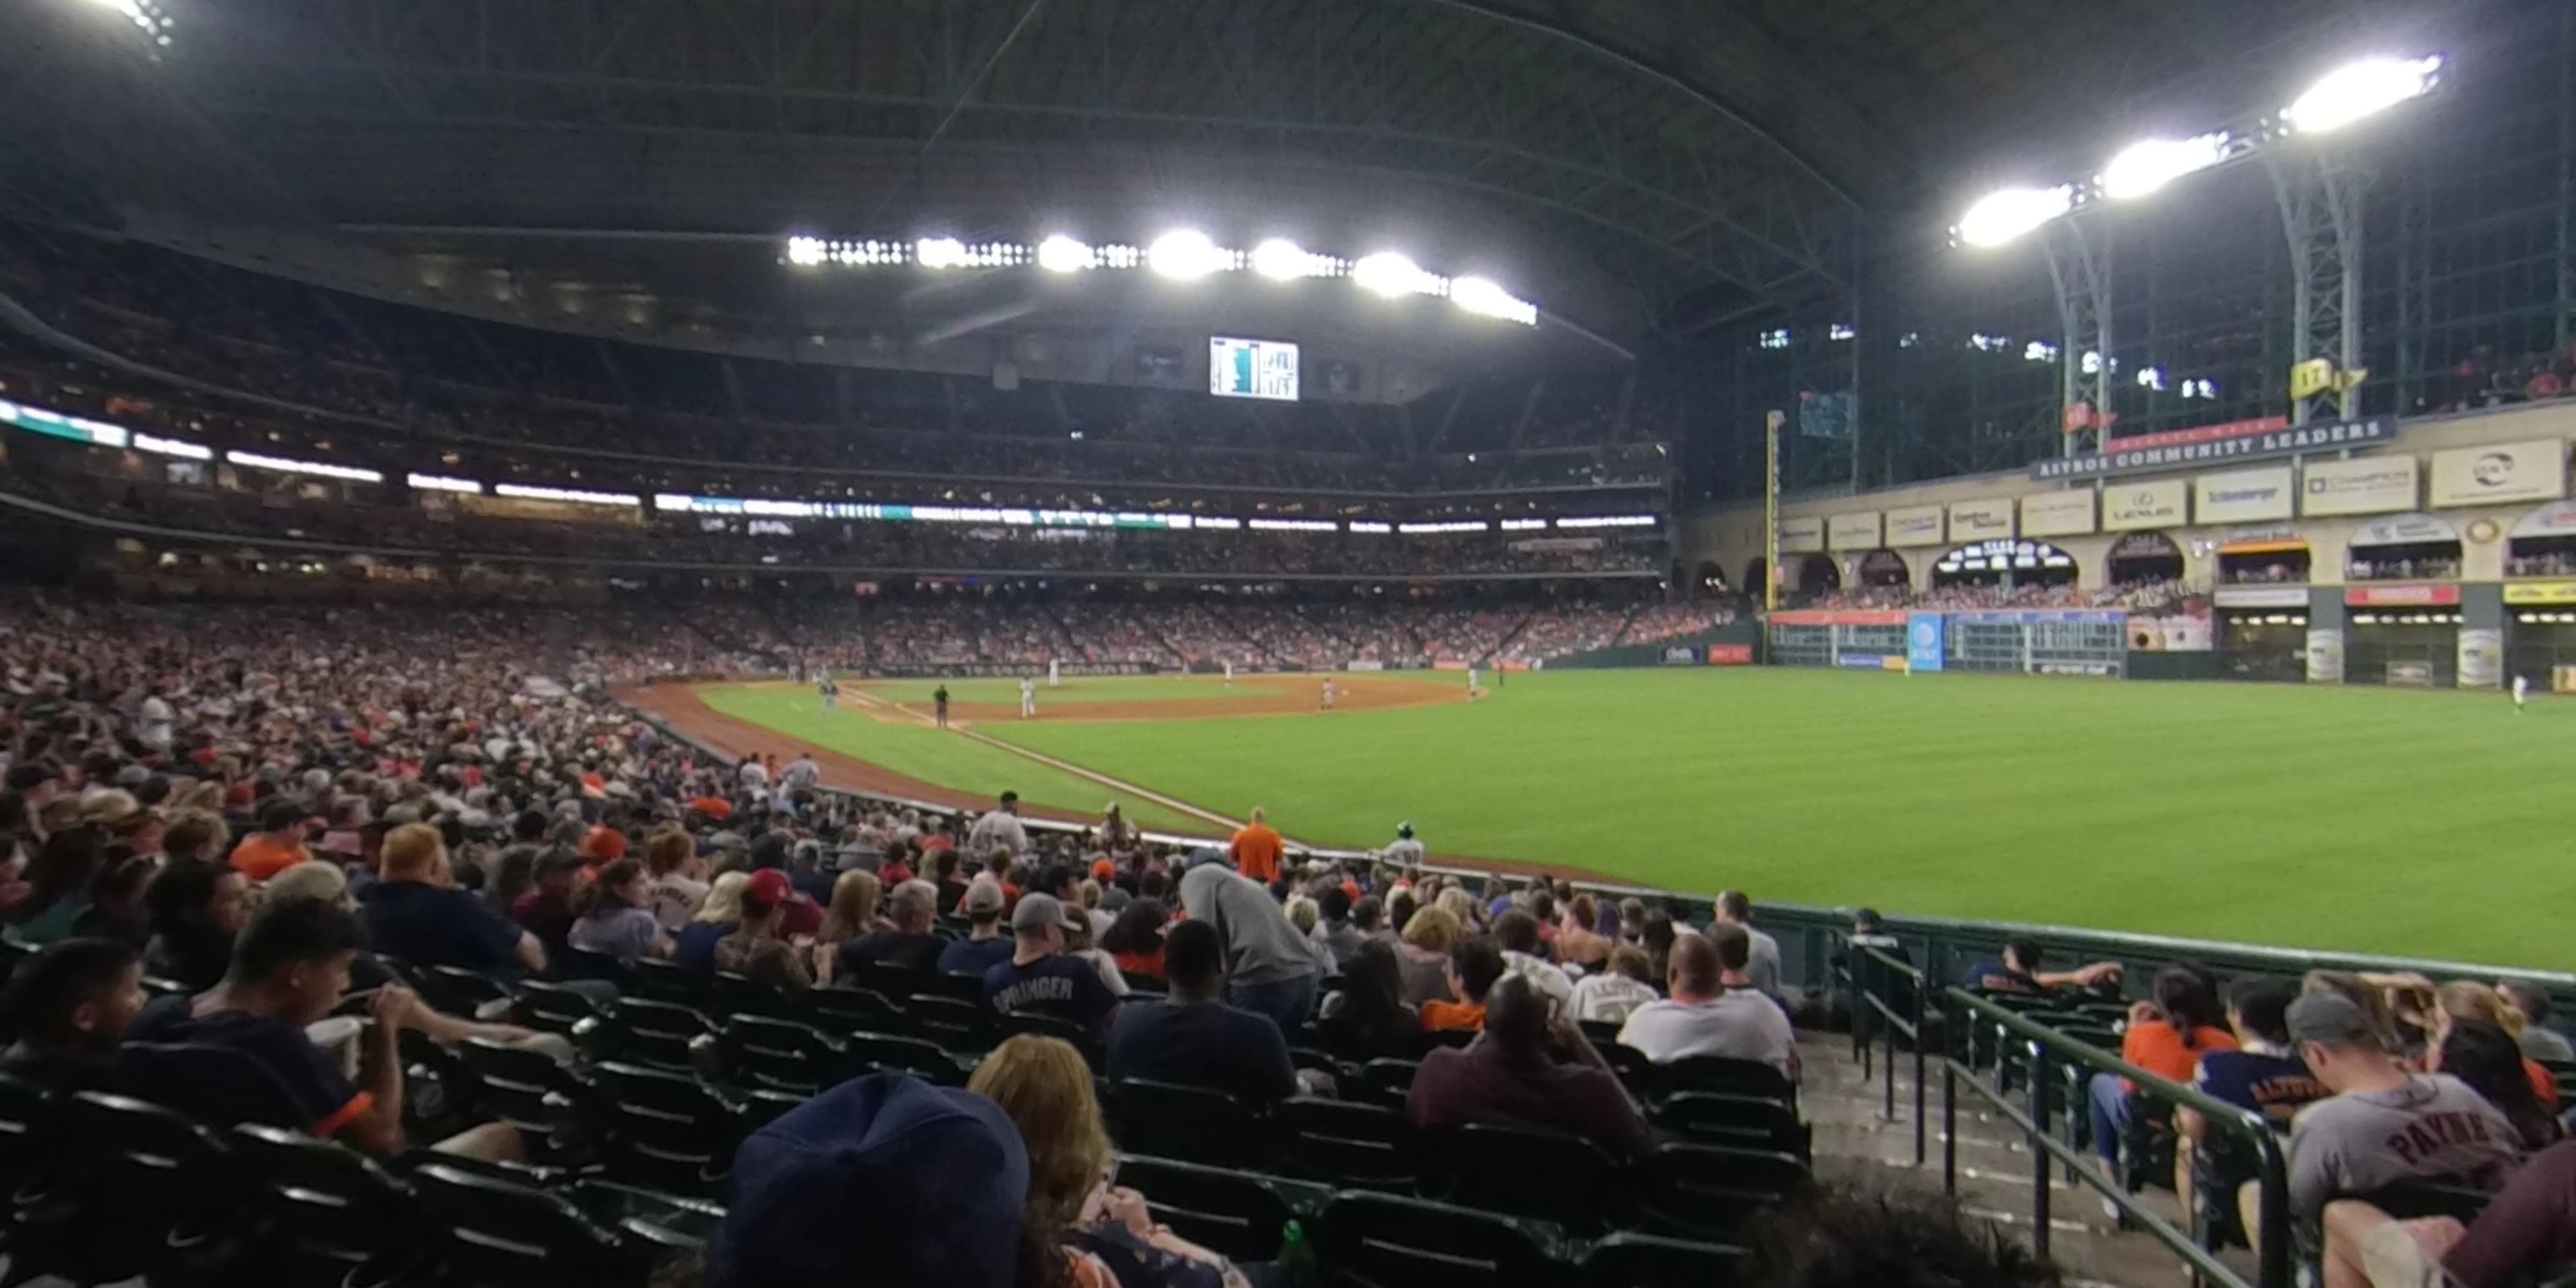 section 133 panoramic seat view  for baseball - minute maid park